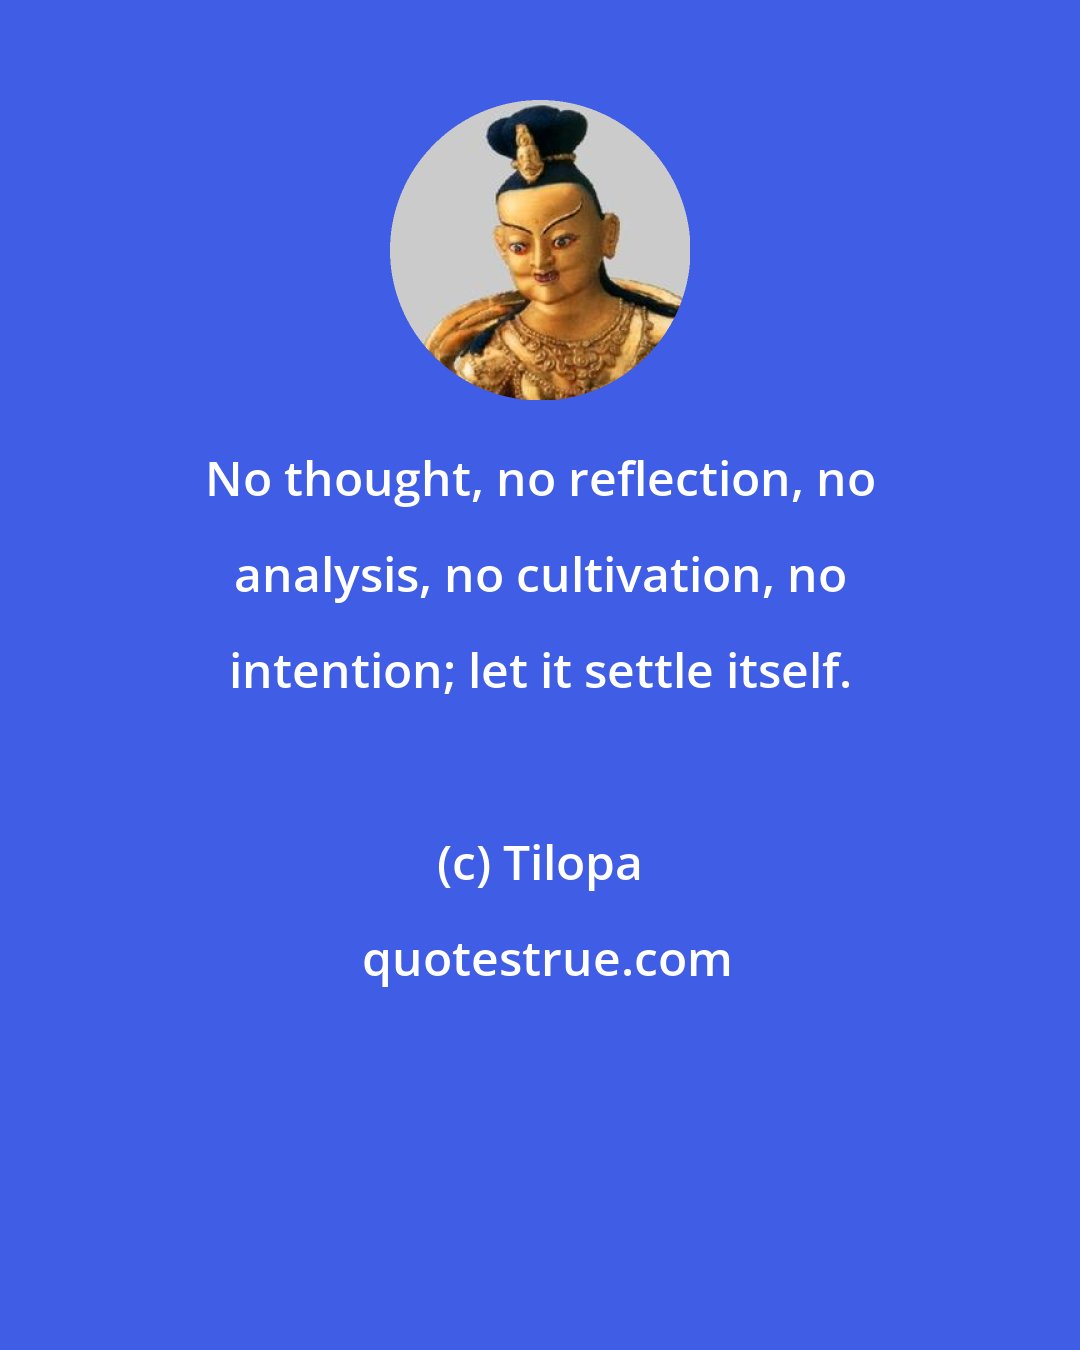 Tilopa: No thought, no reflection, no analysis, no cultivation, no intention; let it settle itself.